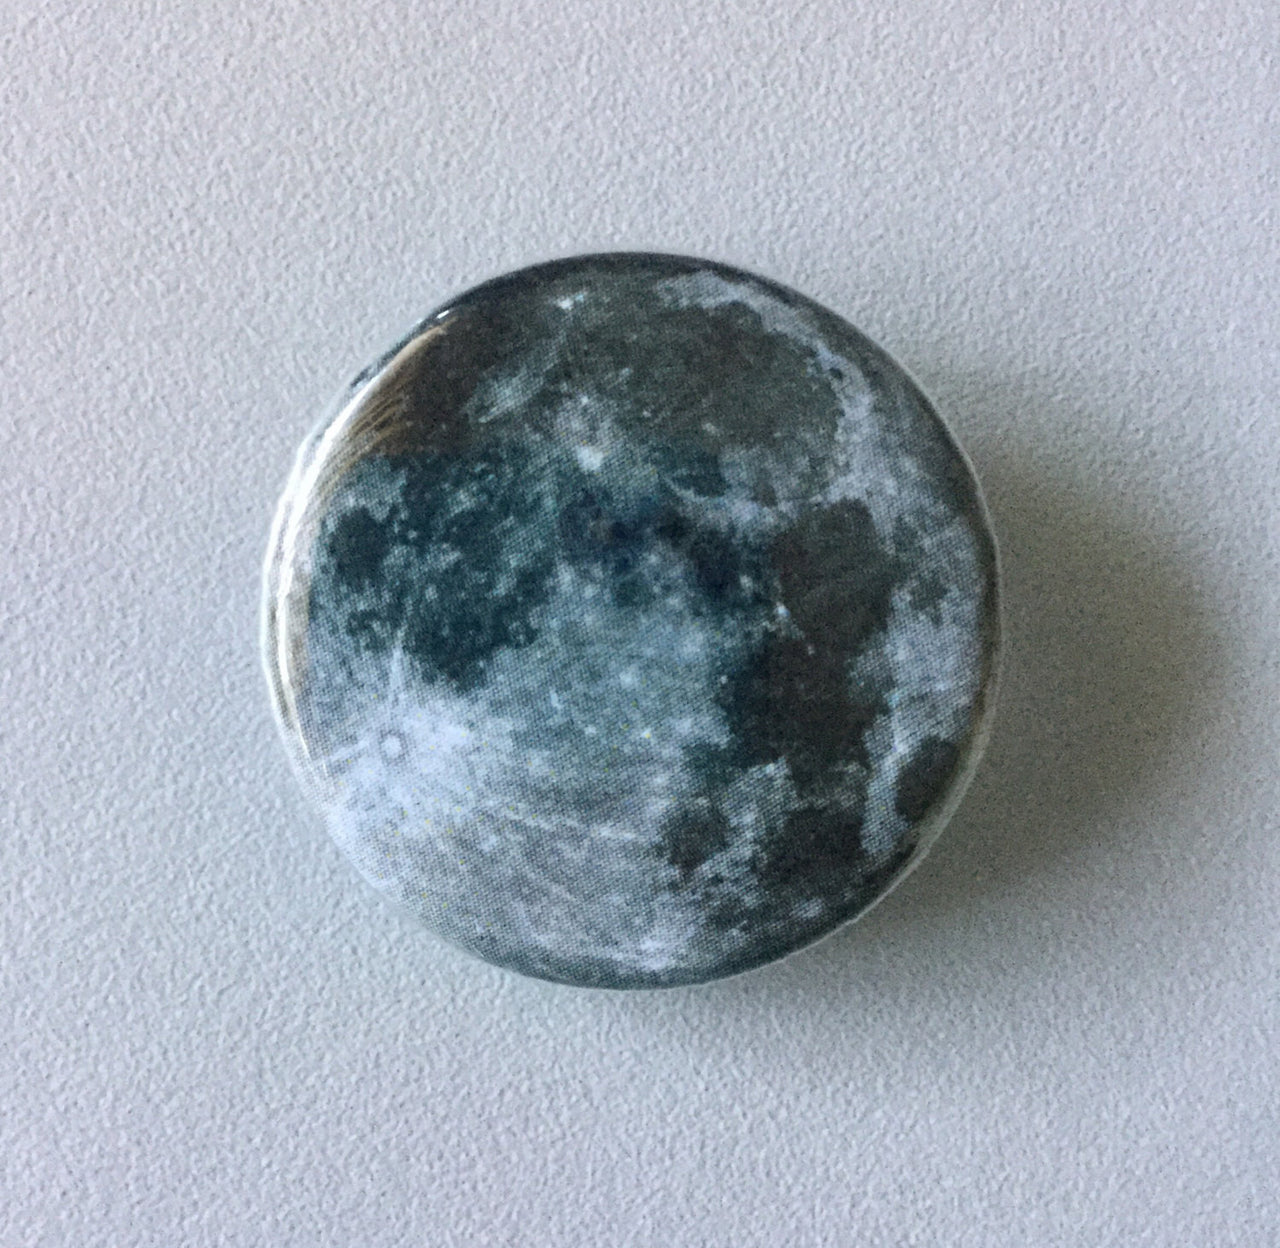 Full moon button - Radical Buttons